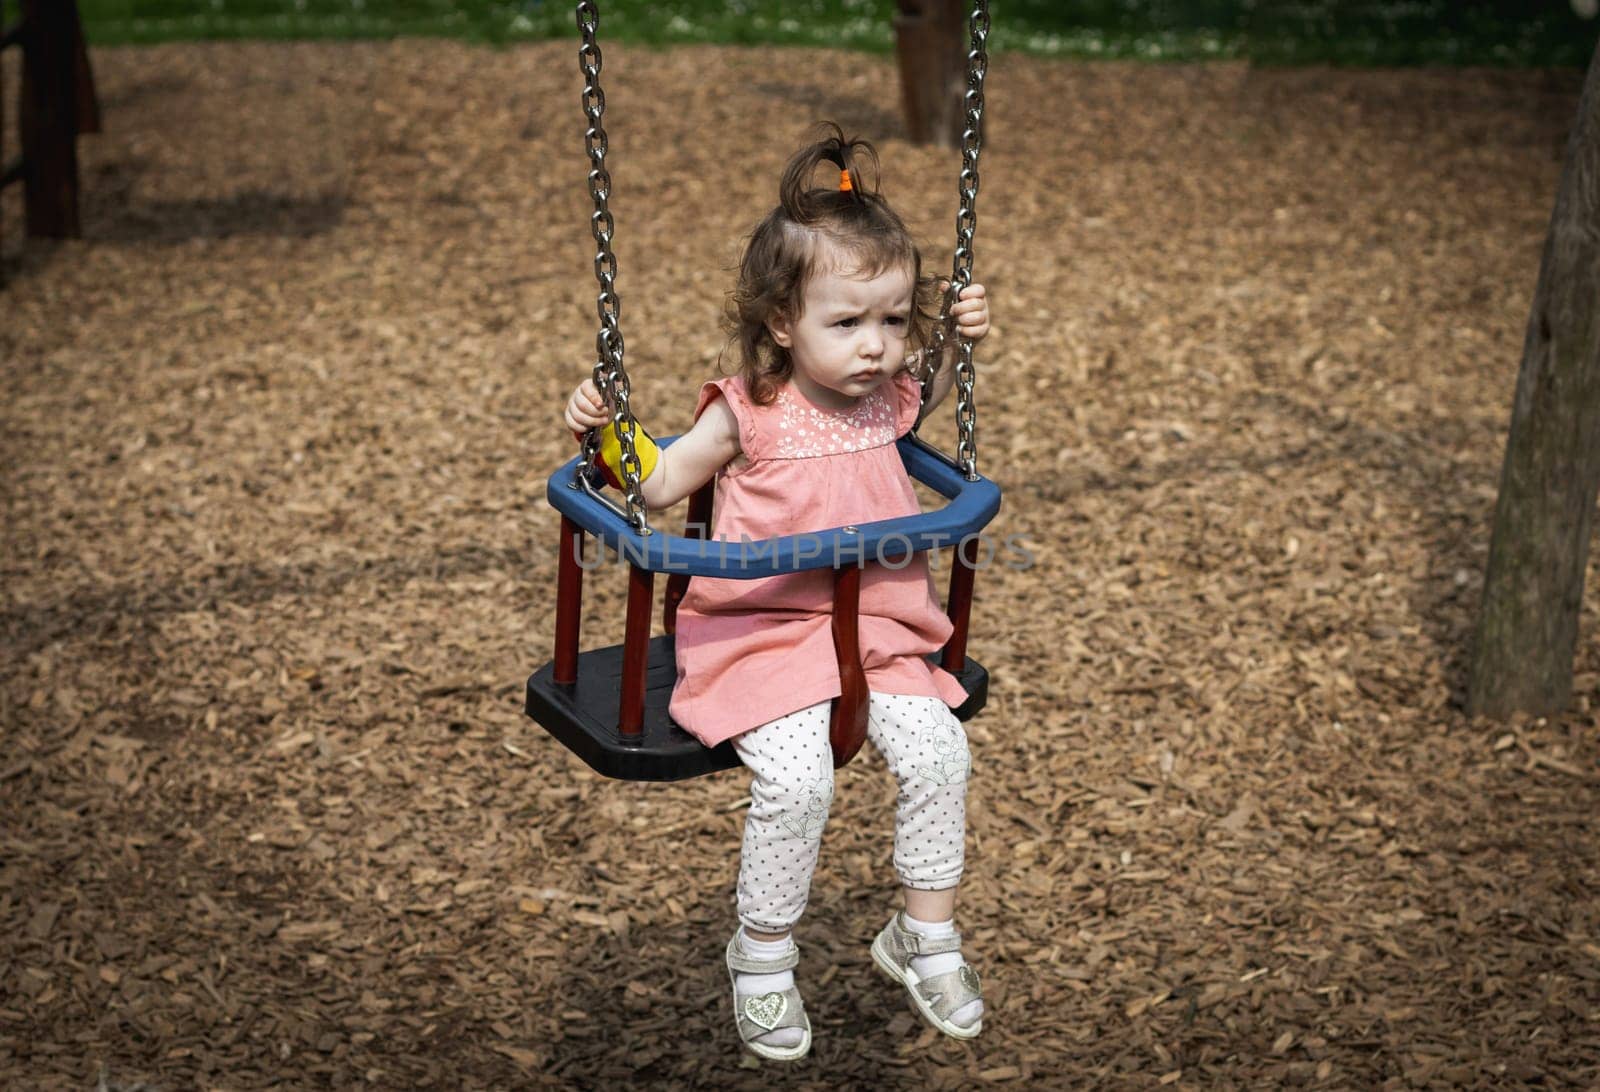 Portrait of one beautiful Caucasian baby girl in a pink dress with a ponytail on the top of her head with a sad and dissatisfied emotion on her face rides on a swing on a summer day in the park on the playground, side view close-up.